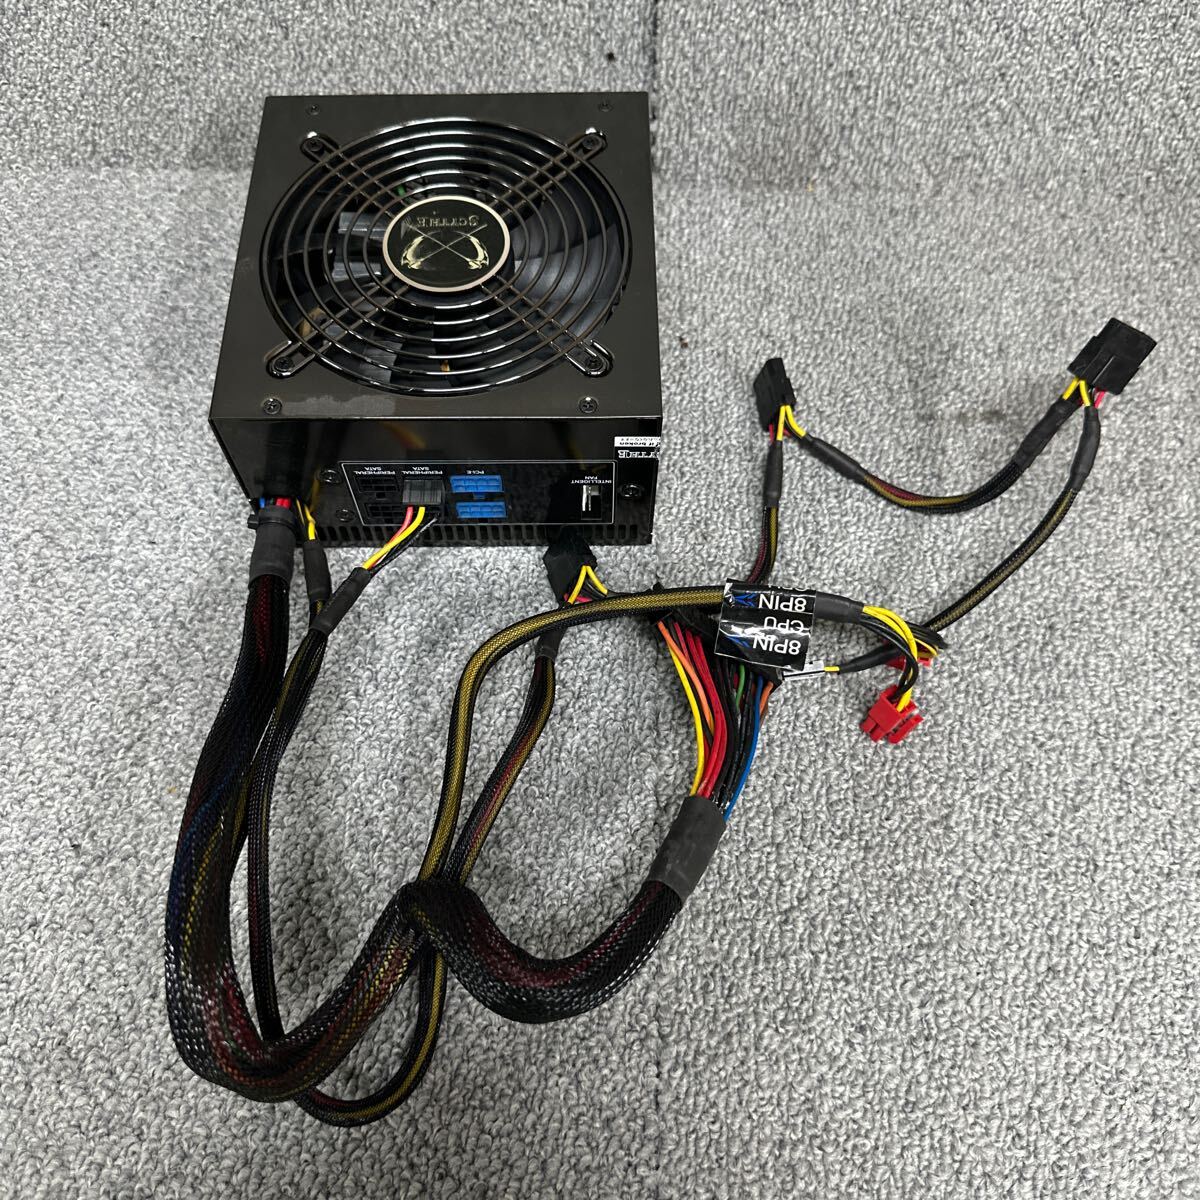 GK super-discount BOX-221 PC power supply BOX SCYTHE Gou power 2 PLUG-IN GOURIKI2-P-600A 600W power supply unit voltage has confirmed secondhand goods 